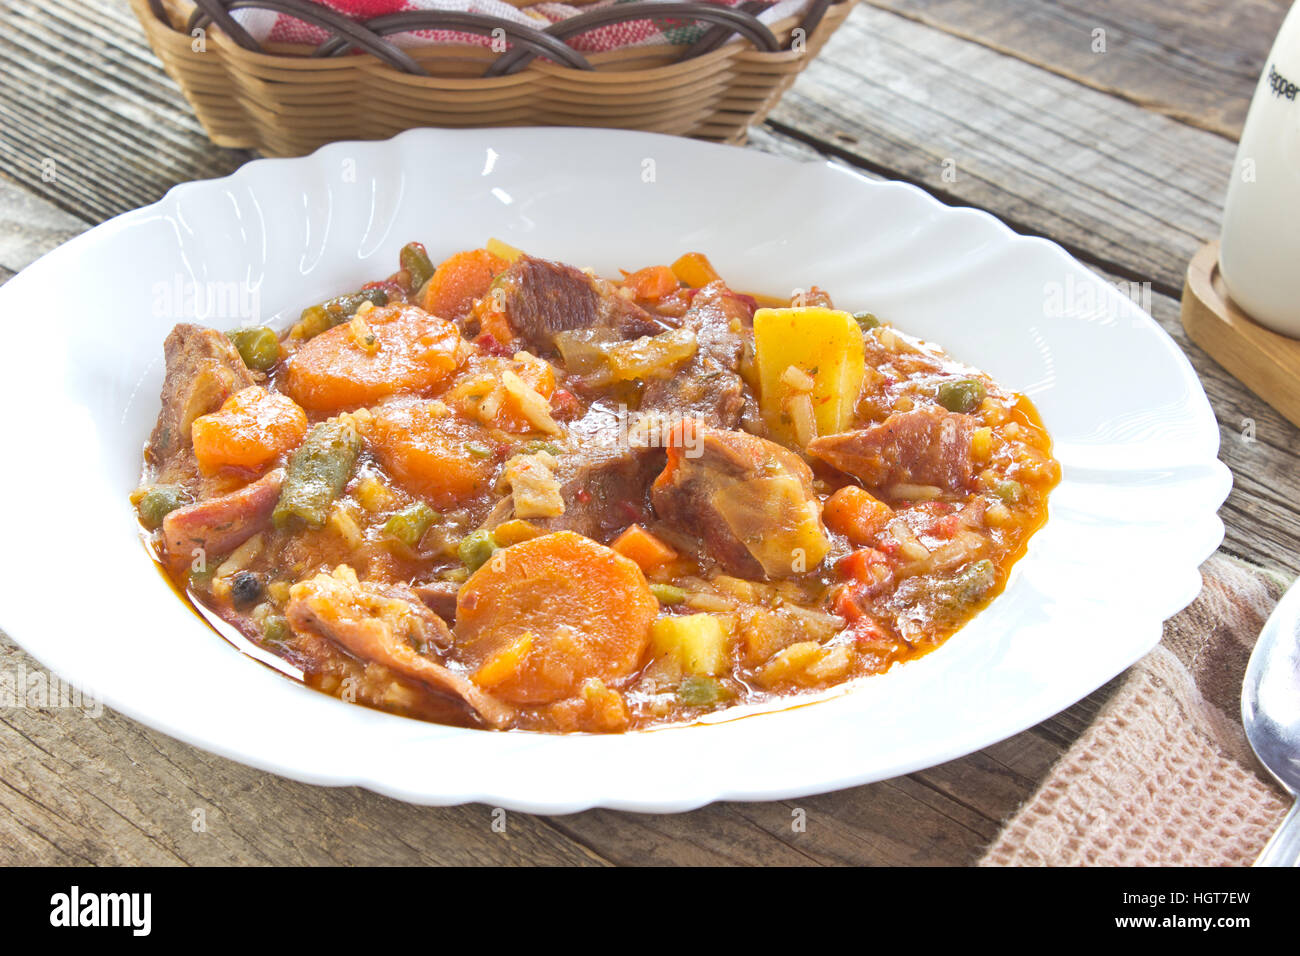 Pork meat stew with vegetables in plate Stock Photo